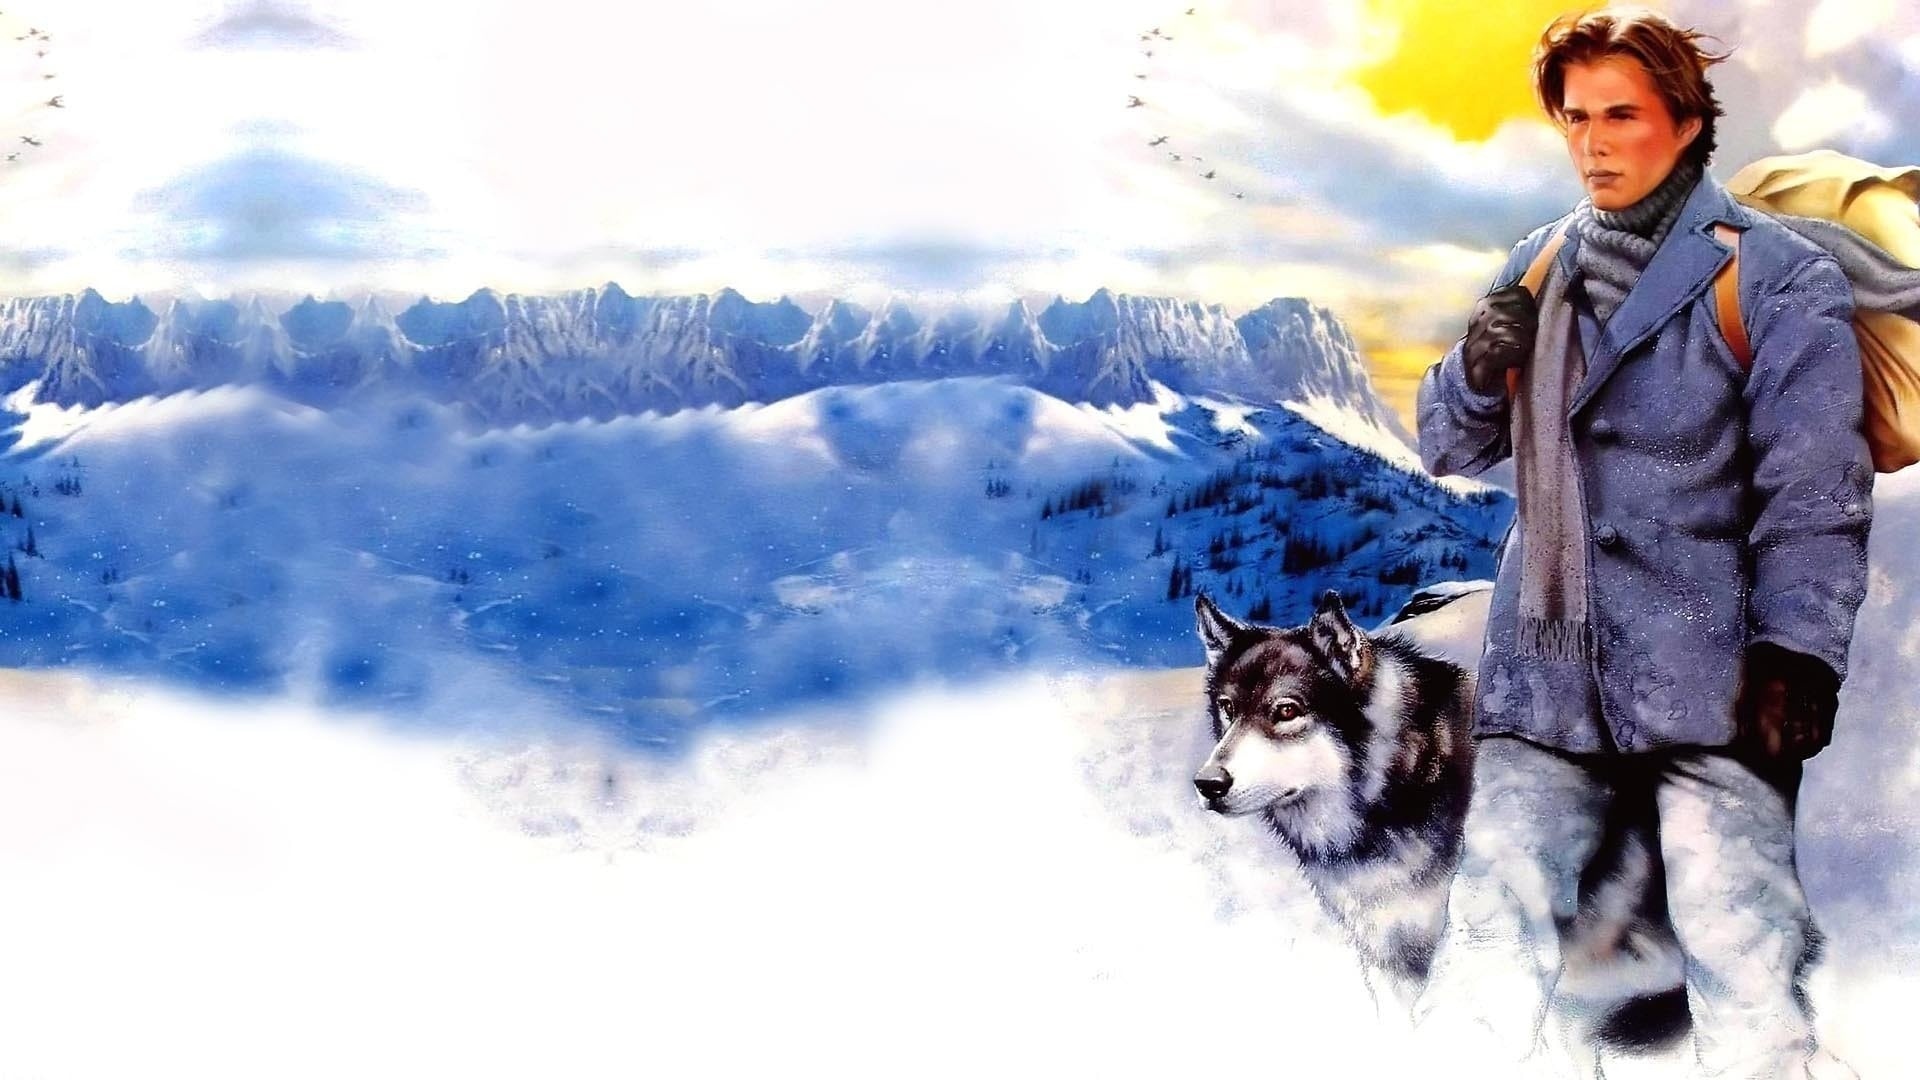 White Fang (Movie), White Fang collection, Backdrops, Movie database, 1920x1080 Full HD Desktop